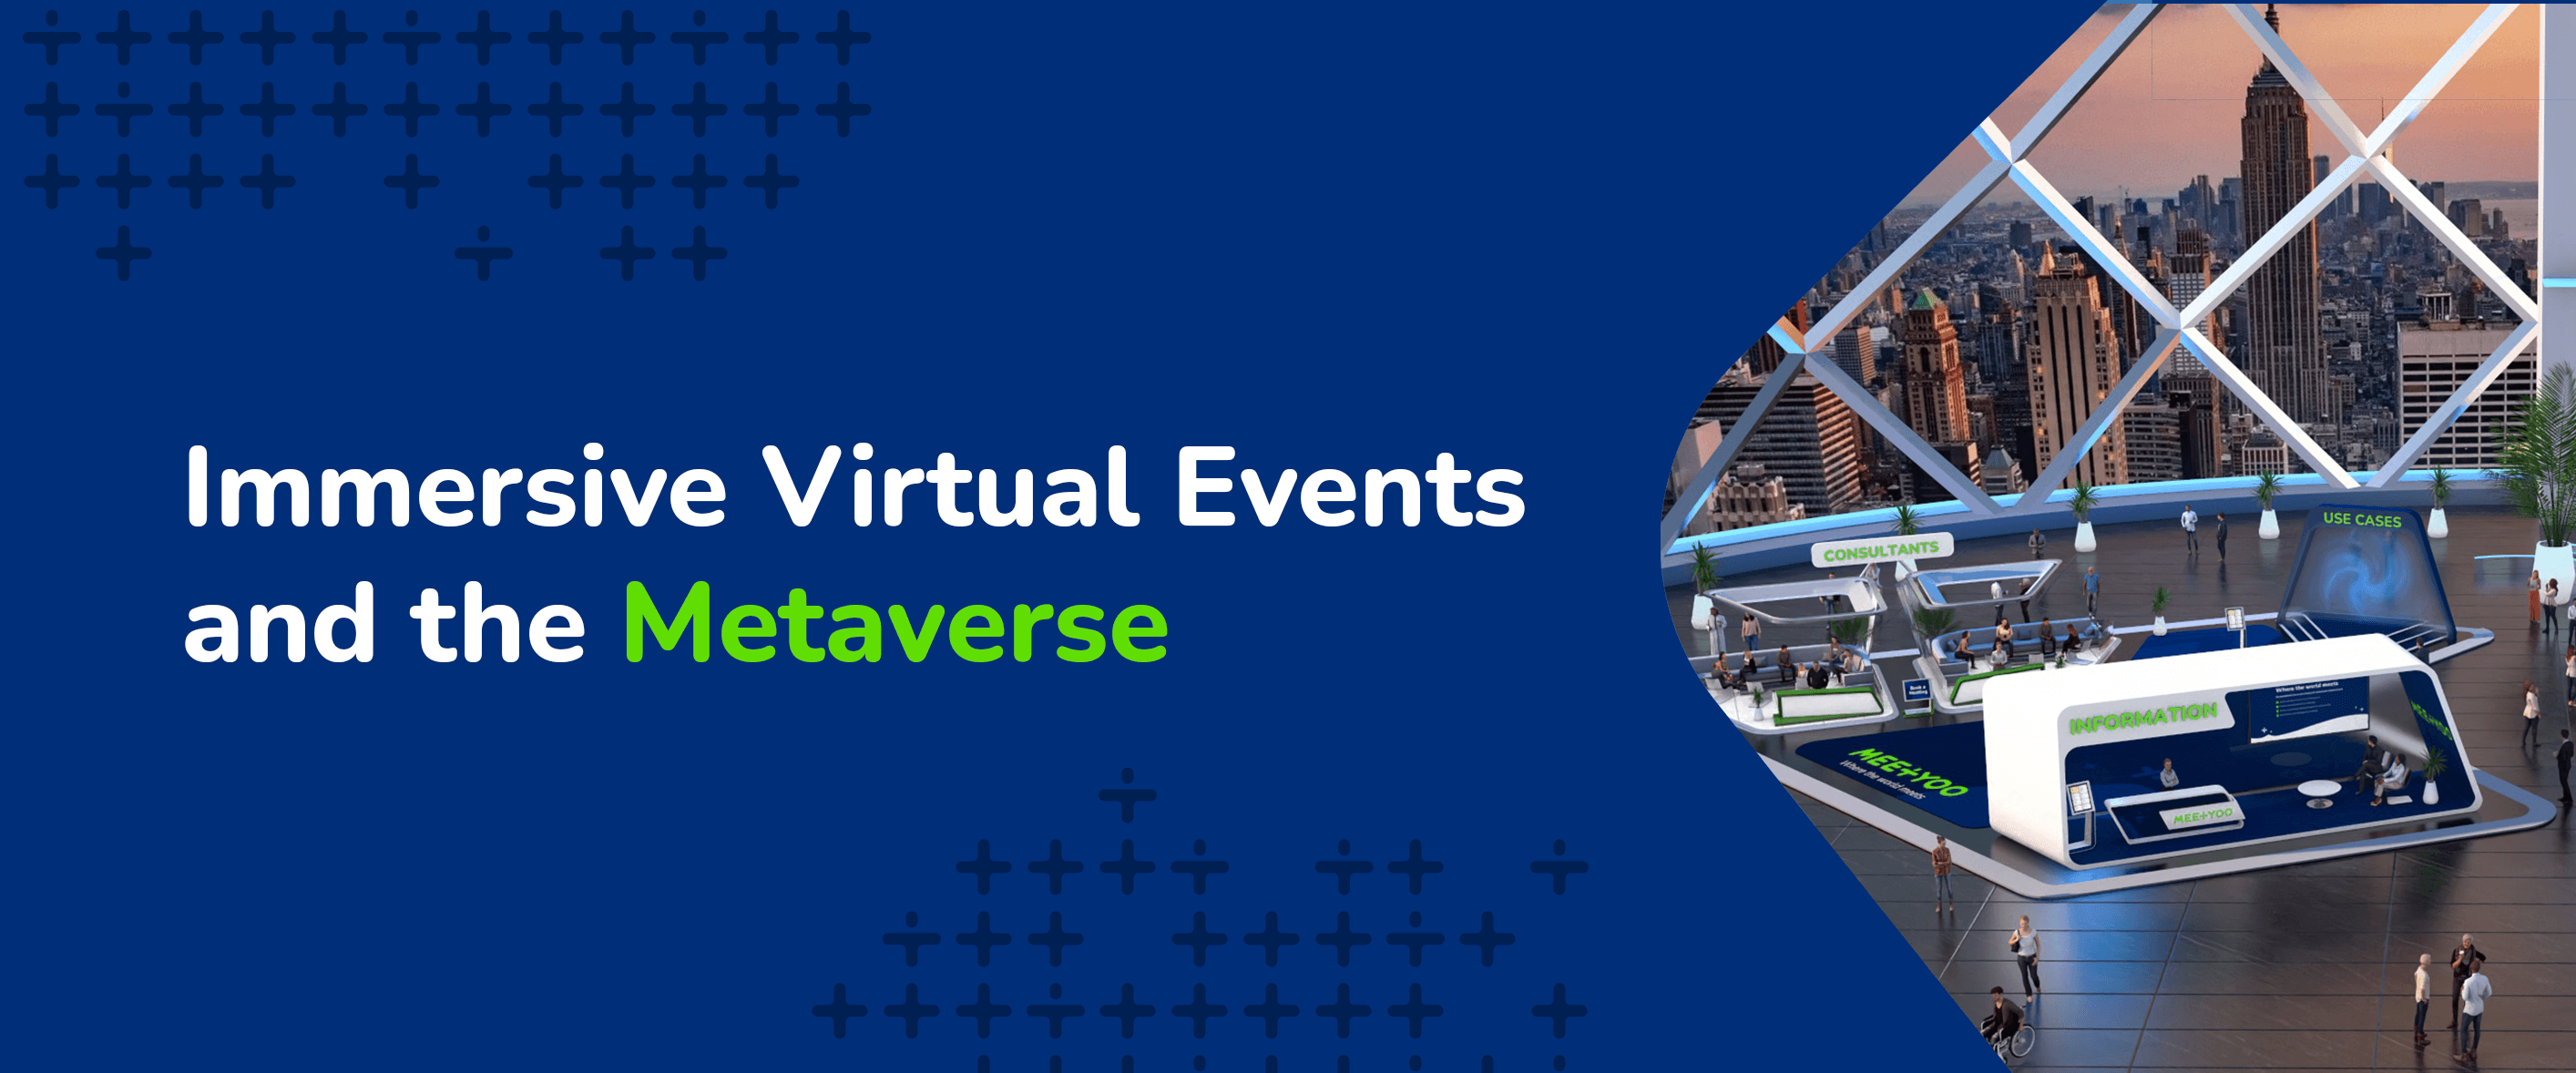 Immersive virtual events and the metaverse - MEETYOO